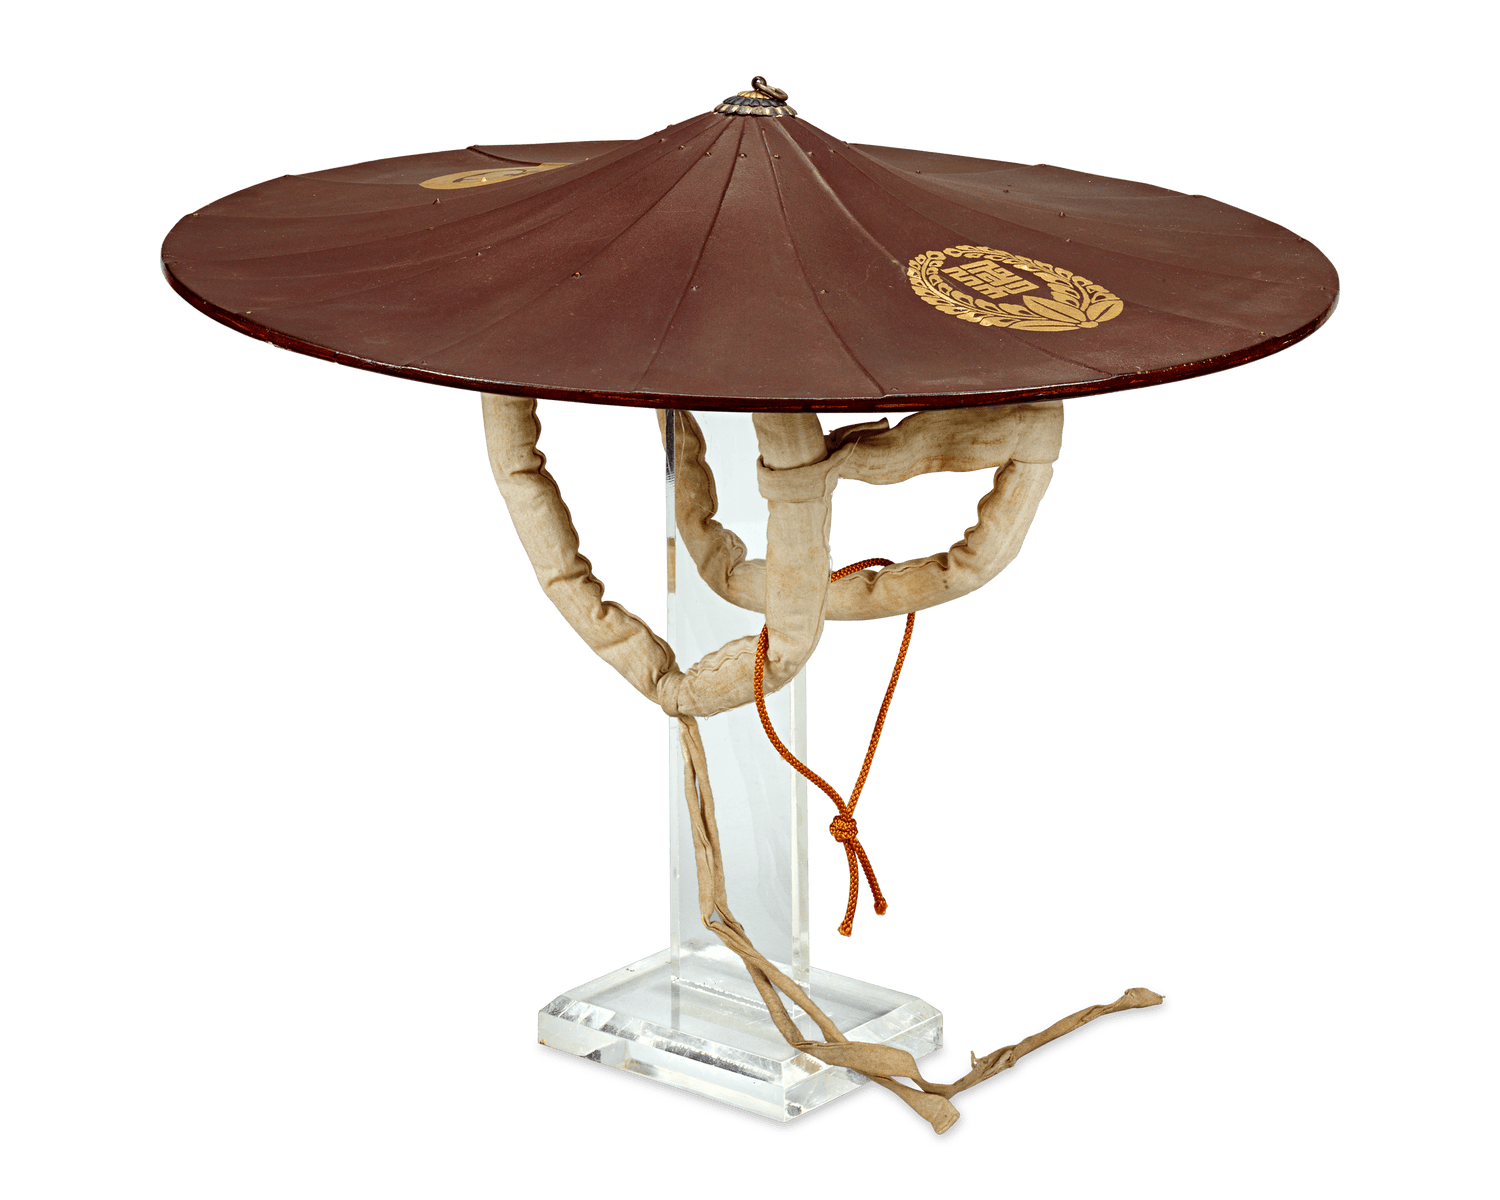 Japanese Lacquered Traveling Hat